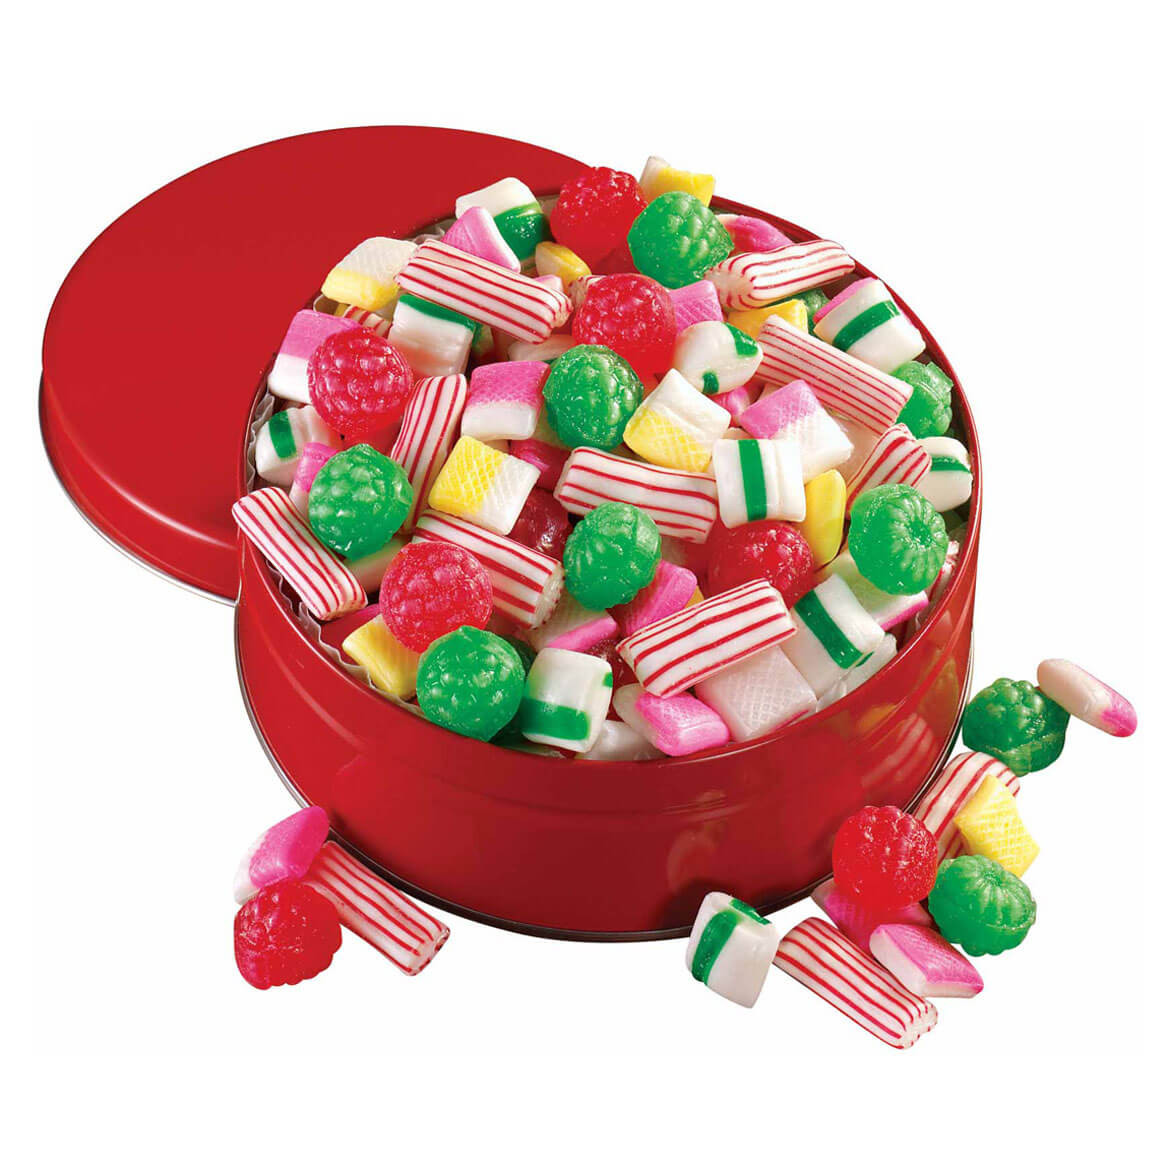 Old Fashion Christmas Candy
 Sugar Free Old Fashioned Christmas Candy Tin Hard Candy